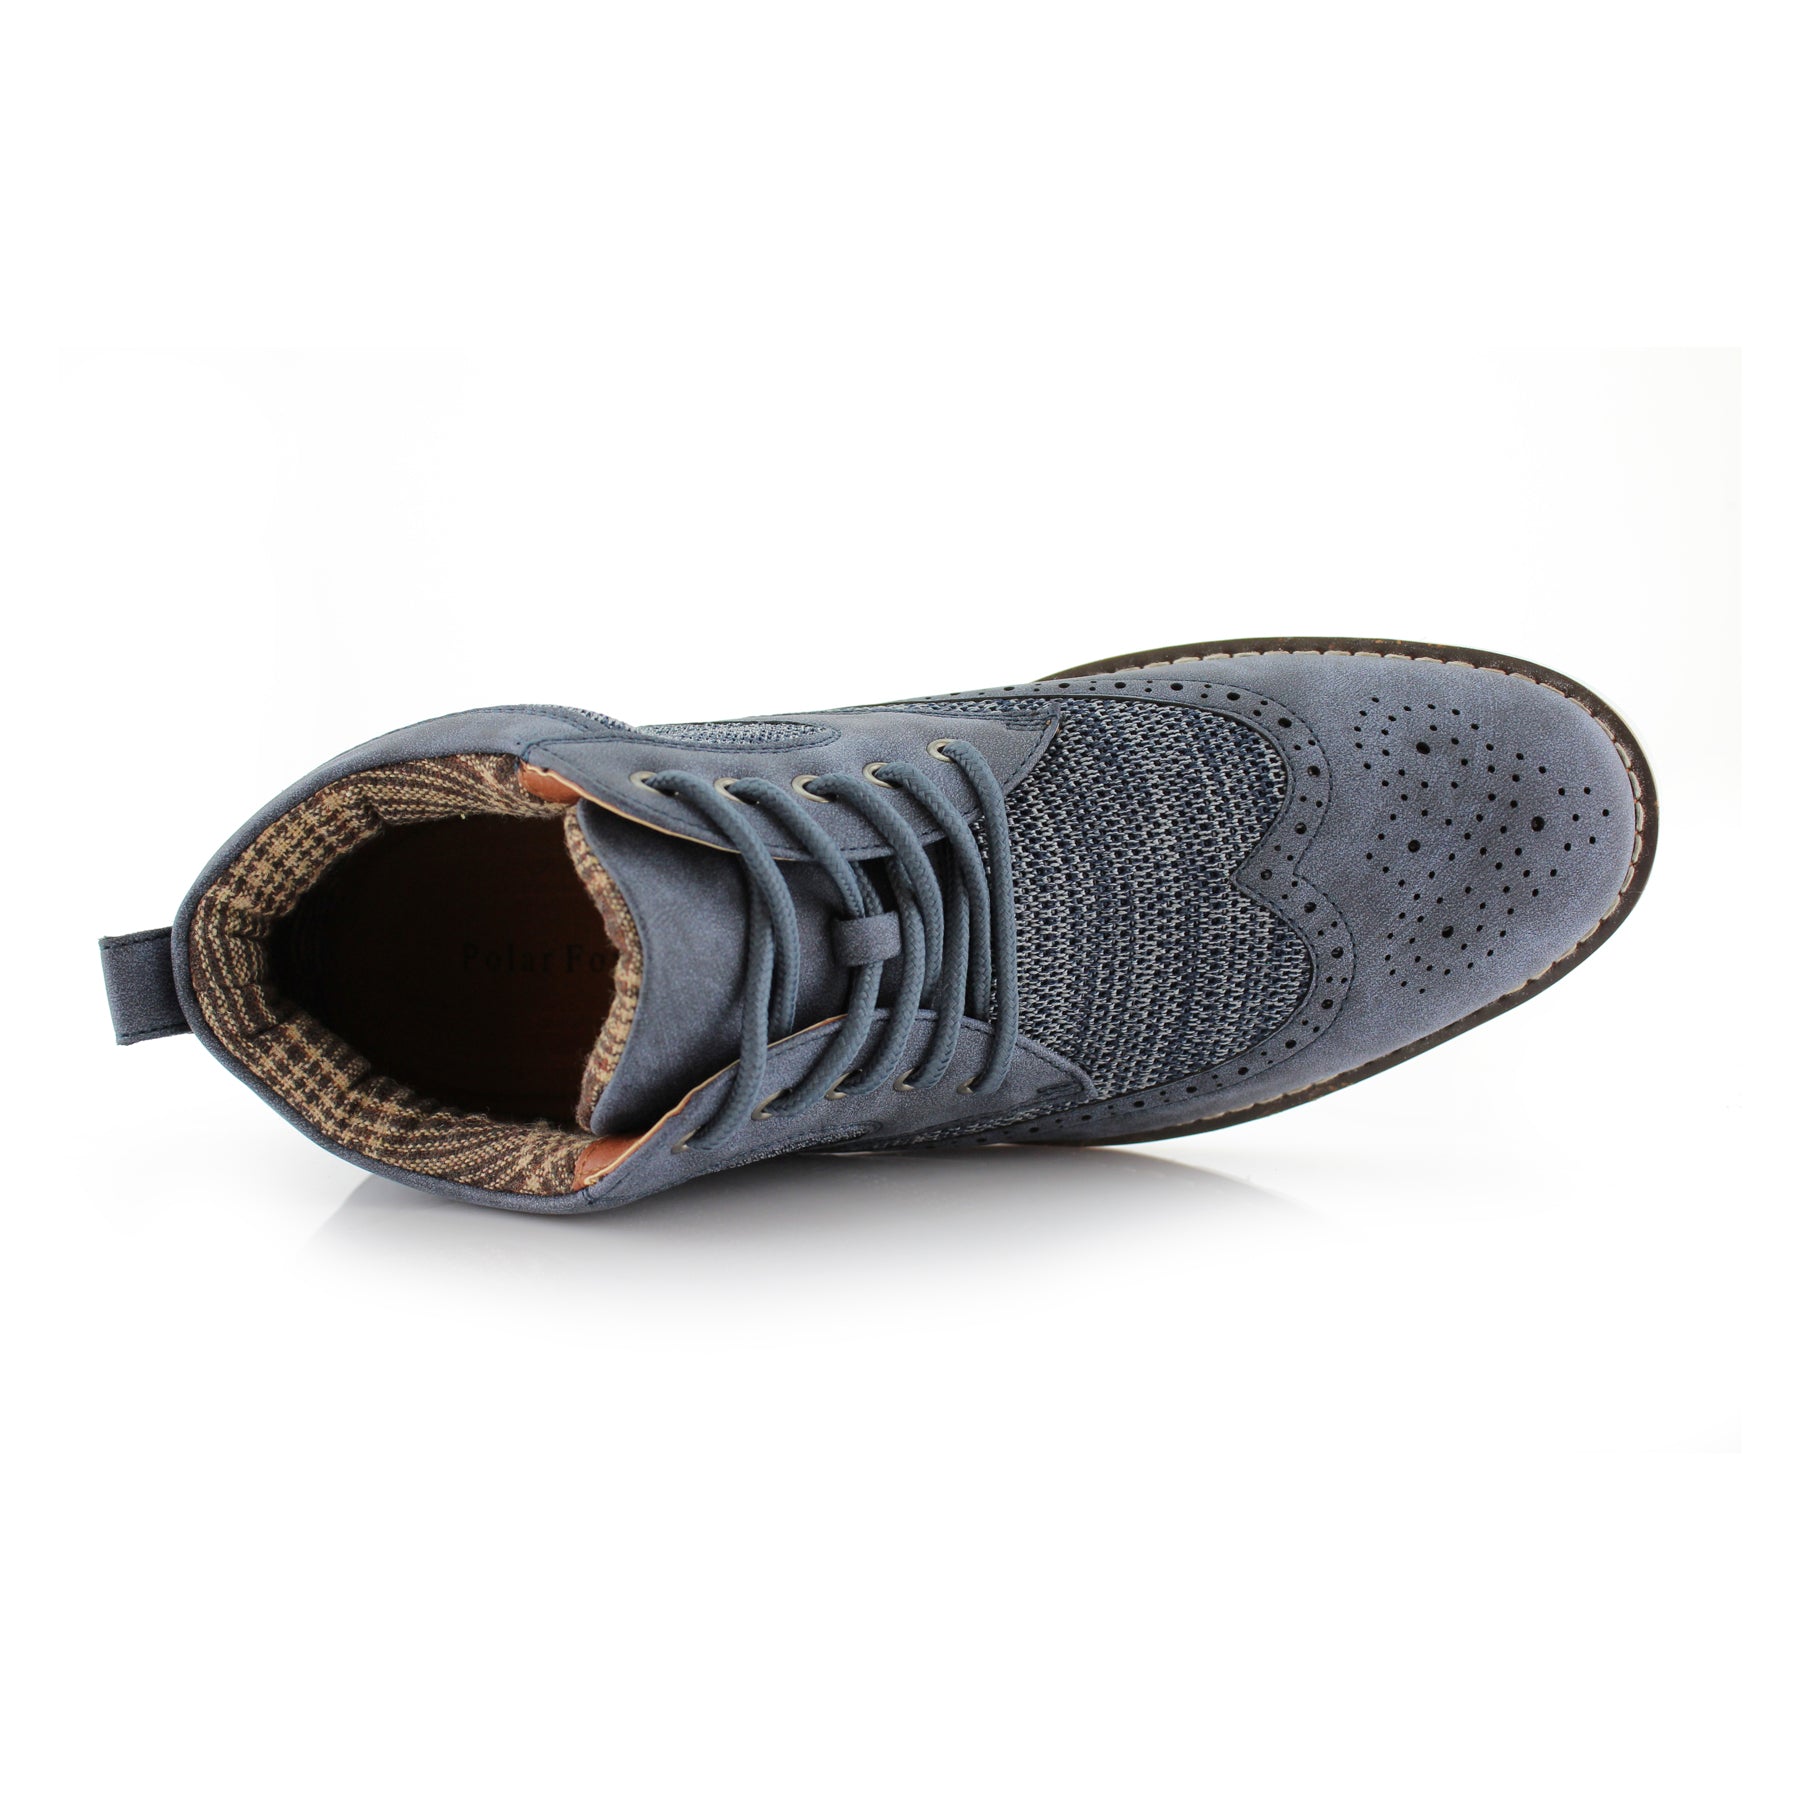 Duo-textured Mid-Top Wingtip Sneaker | Colbert by Polar Fox | Conal Footwear | Top-Down Angle View